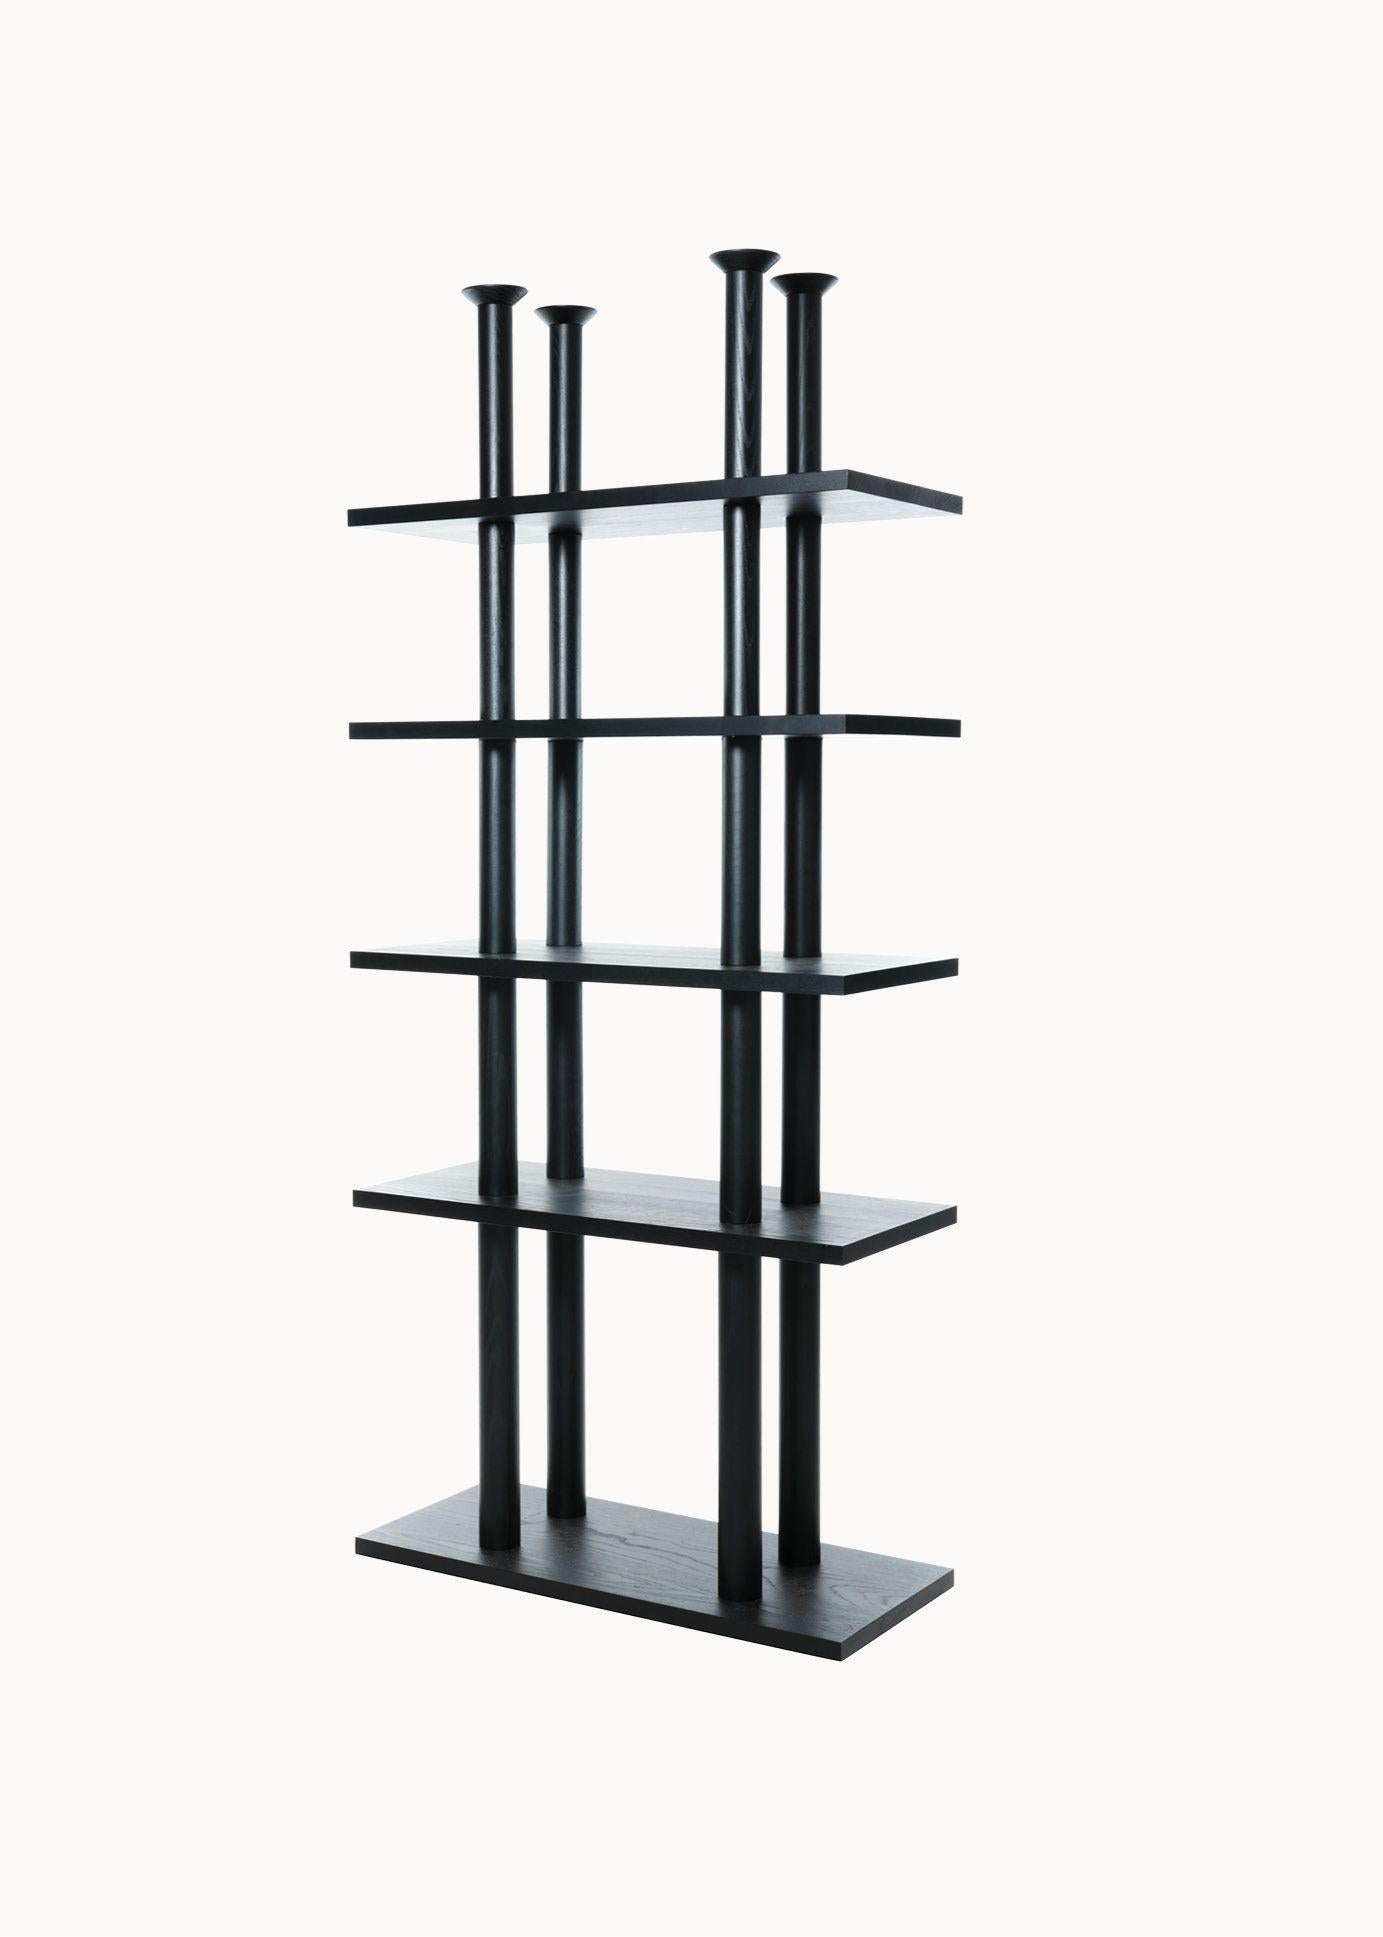 Peristylo Black Wood Shelve by Oscar Tusquets for Bd Barcelona

Inspired by his 1994 design Columnata, a name that comes from his continuous reference to the column in his work, Oscar Tusquets brings us the New Peristylo shelf.


DETAILS

A simple